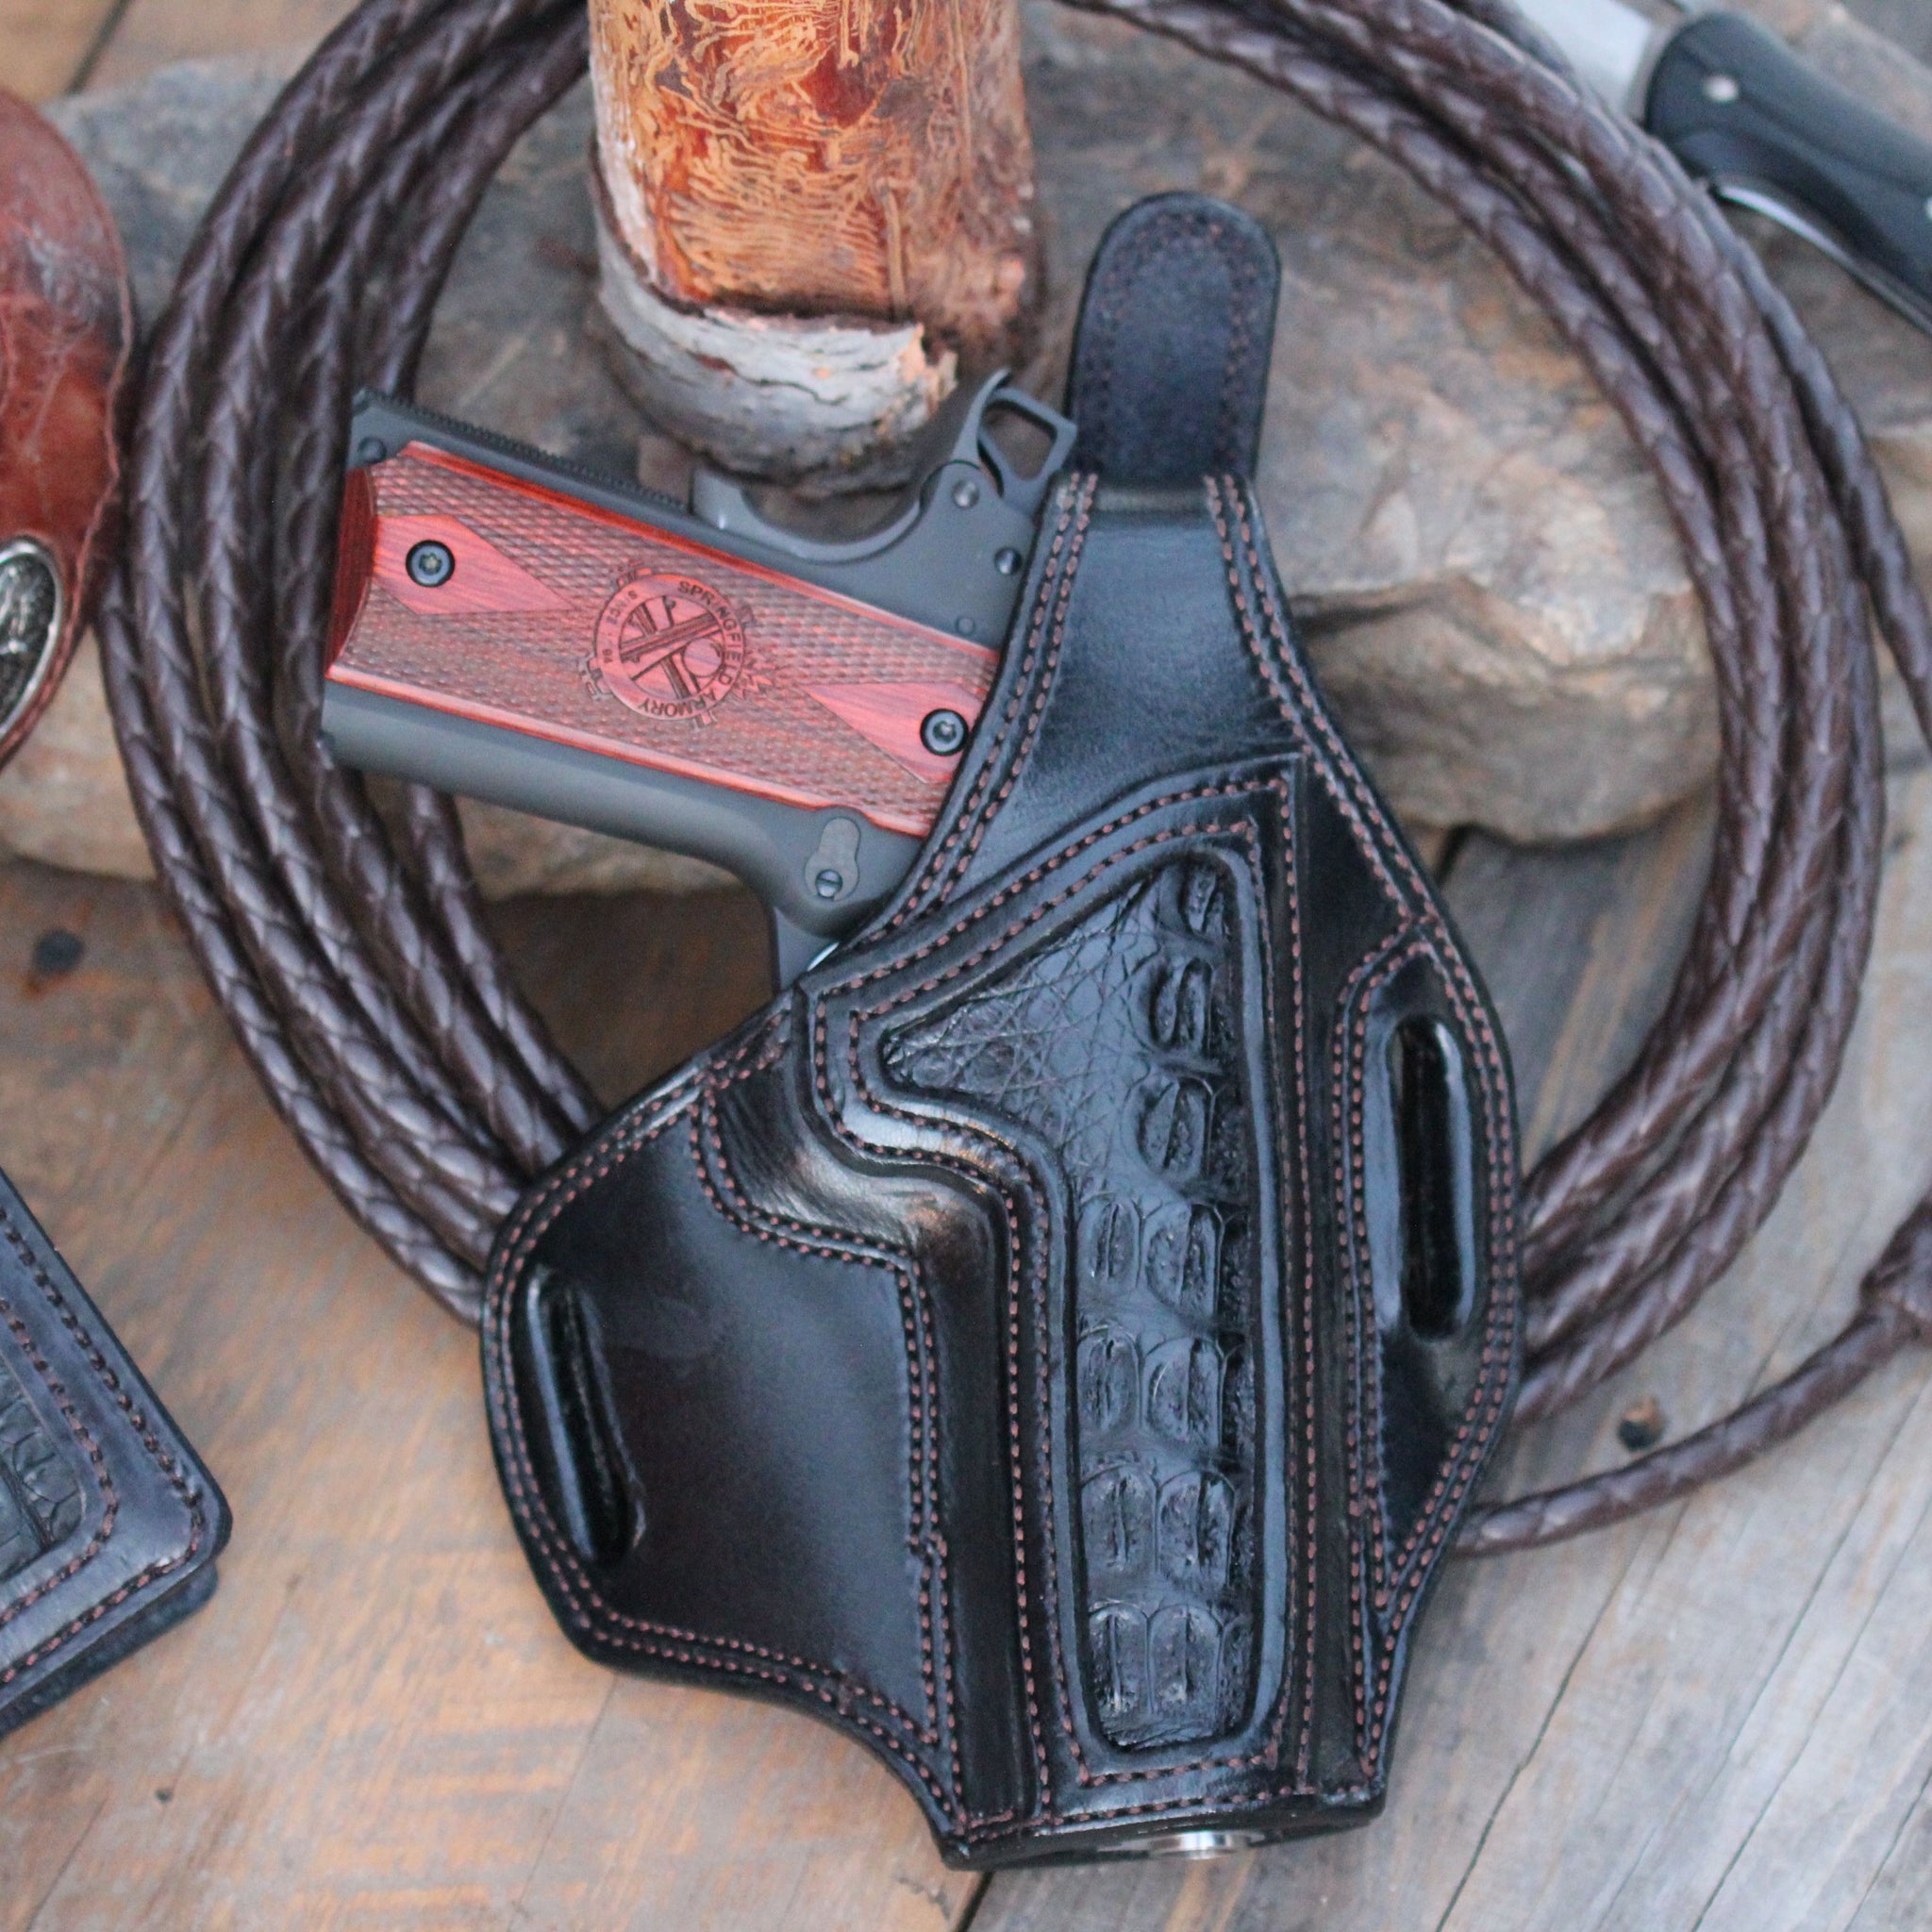 Leather Holster .Panhandle Red Company specializing in Leather Holsters,  Leather Goods, Handbags, Totes, Purses, Everyday Carry Needs, and more. Full-grain leather items, custom gifts, all Handcrafted in Idaho, USA.